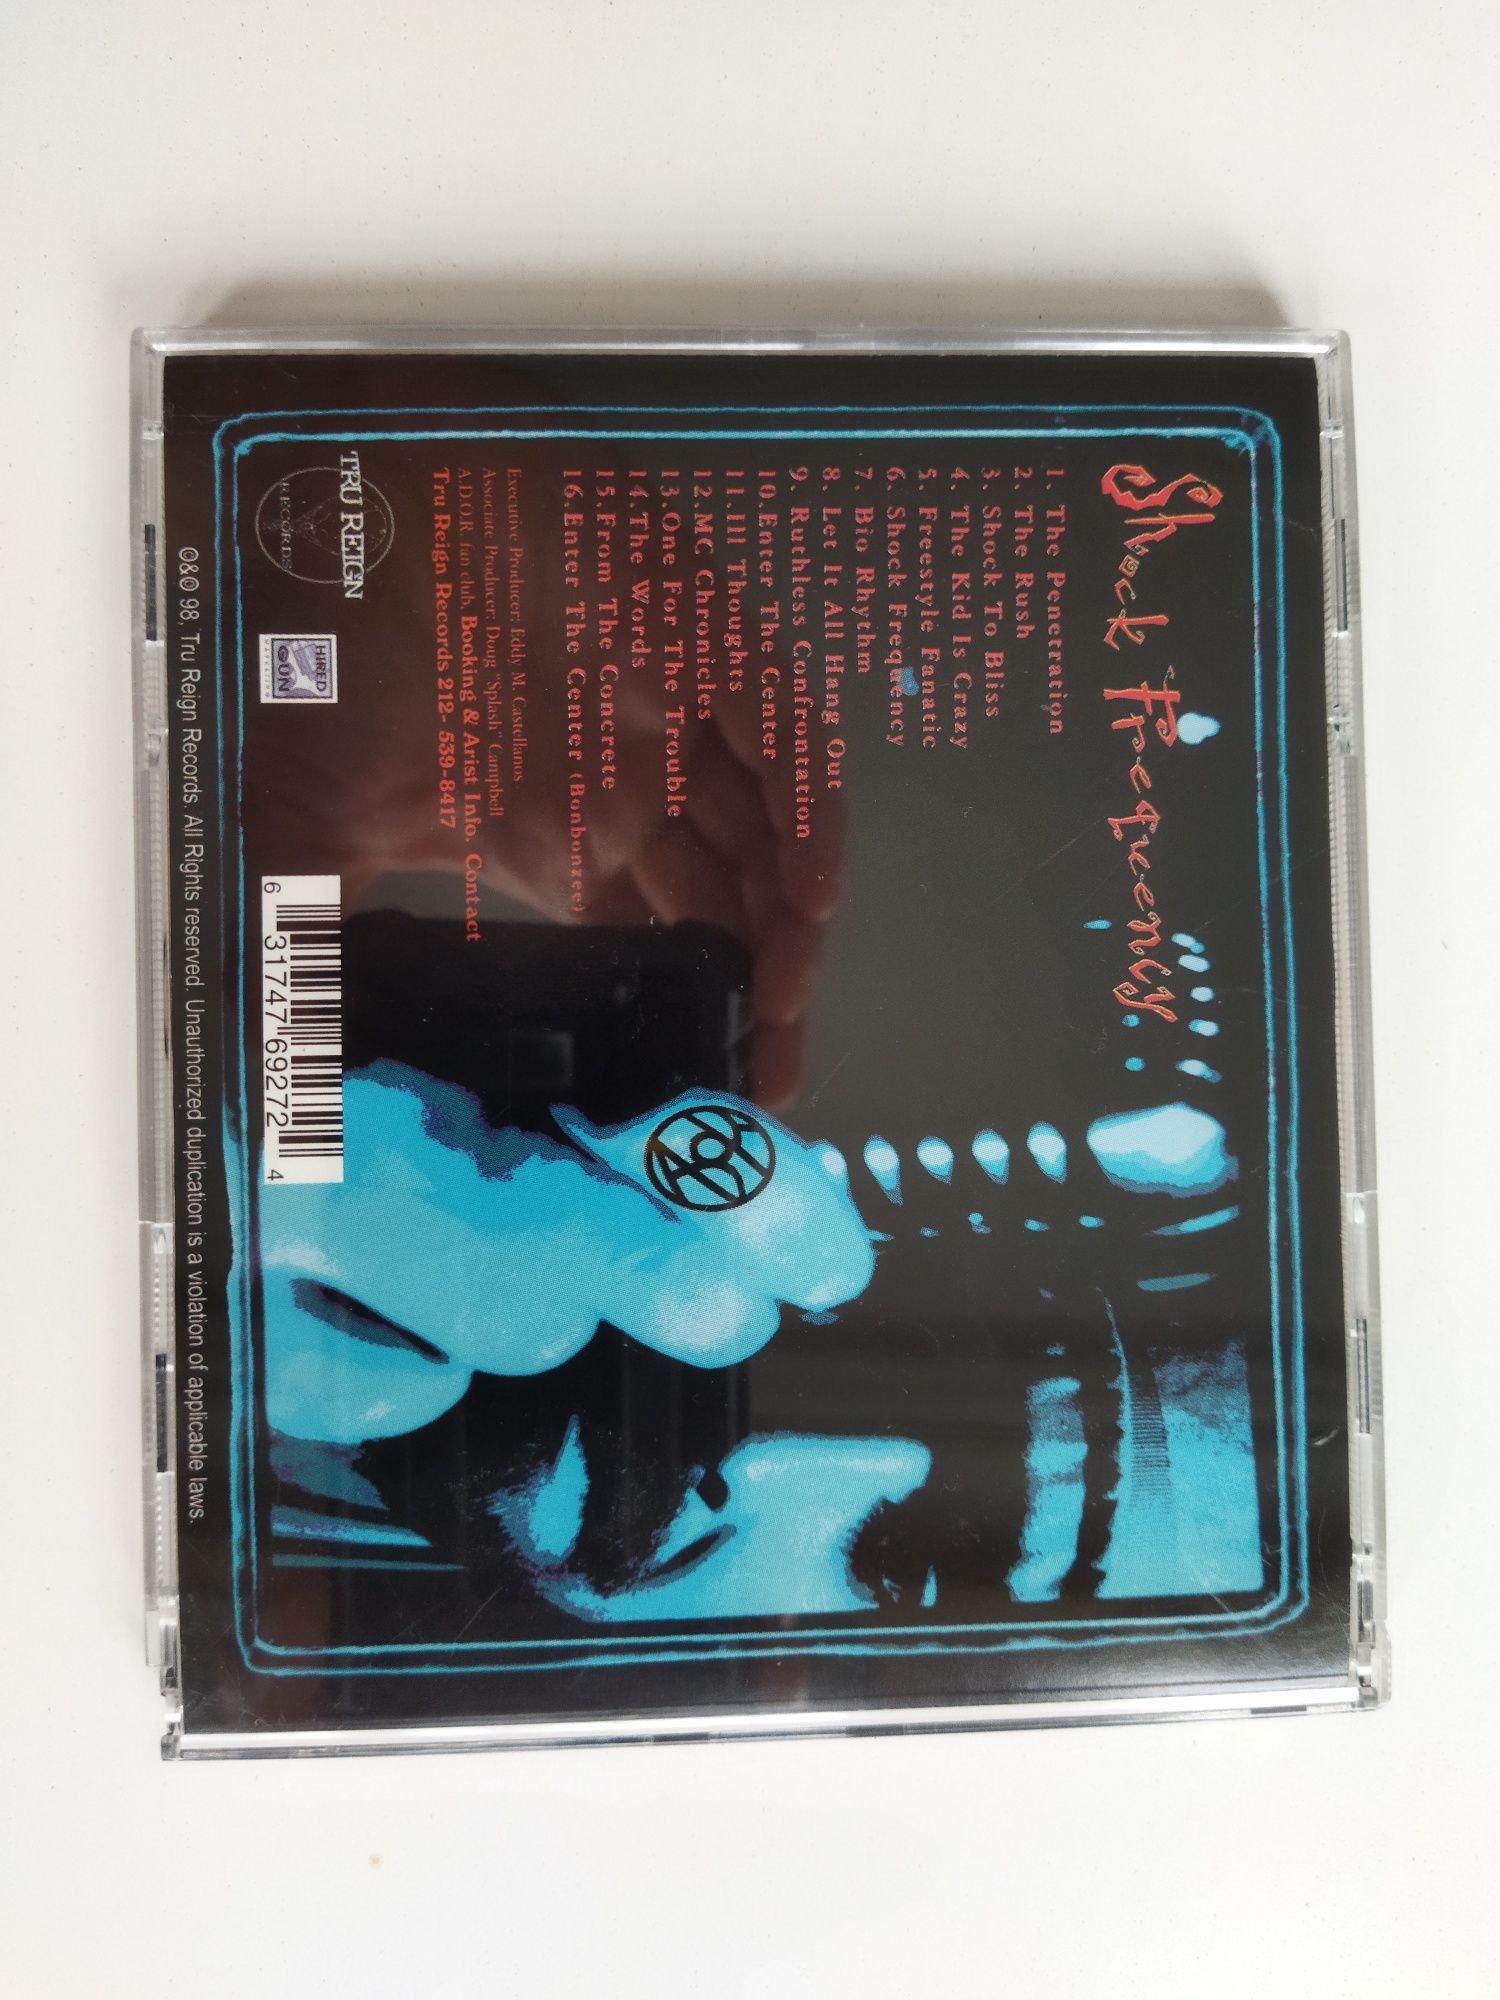 A.D.O.R. - Shock Frequency CD /US Press 1998